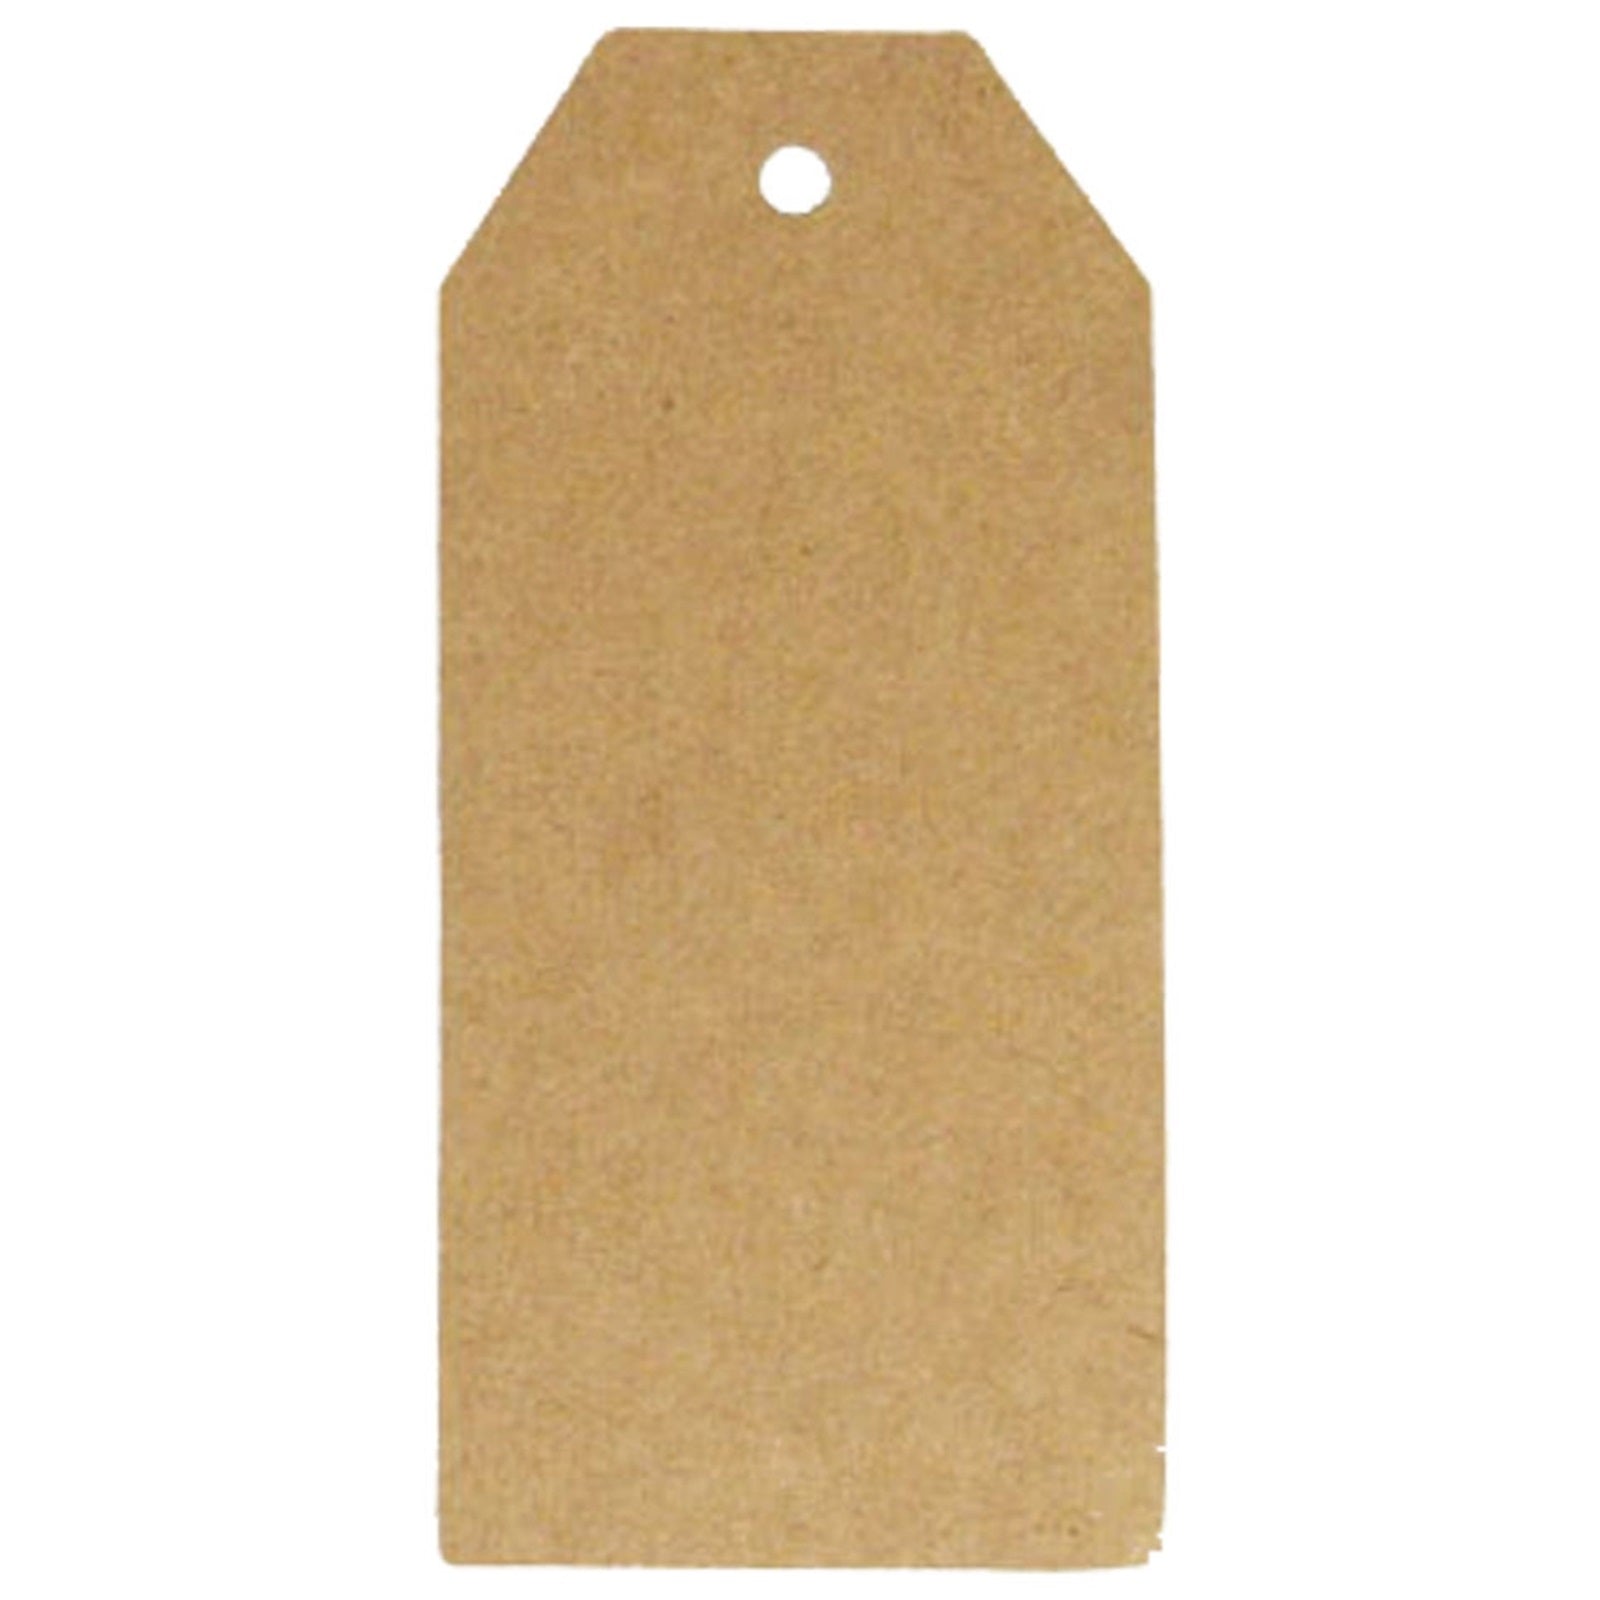 Wrapables 50 Gift Tags/Kraft Hang Tags with Free Cut Strings for Gifts, Crafts & Price Tags - Original Tag